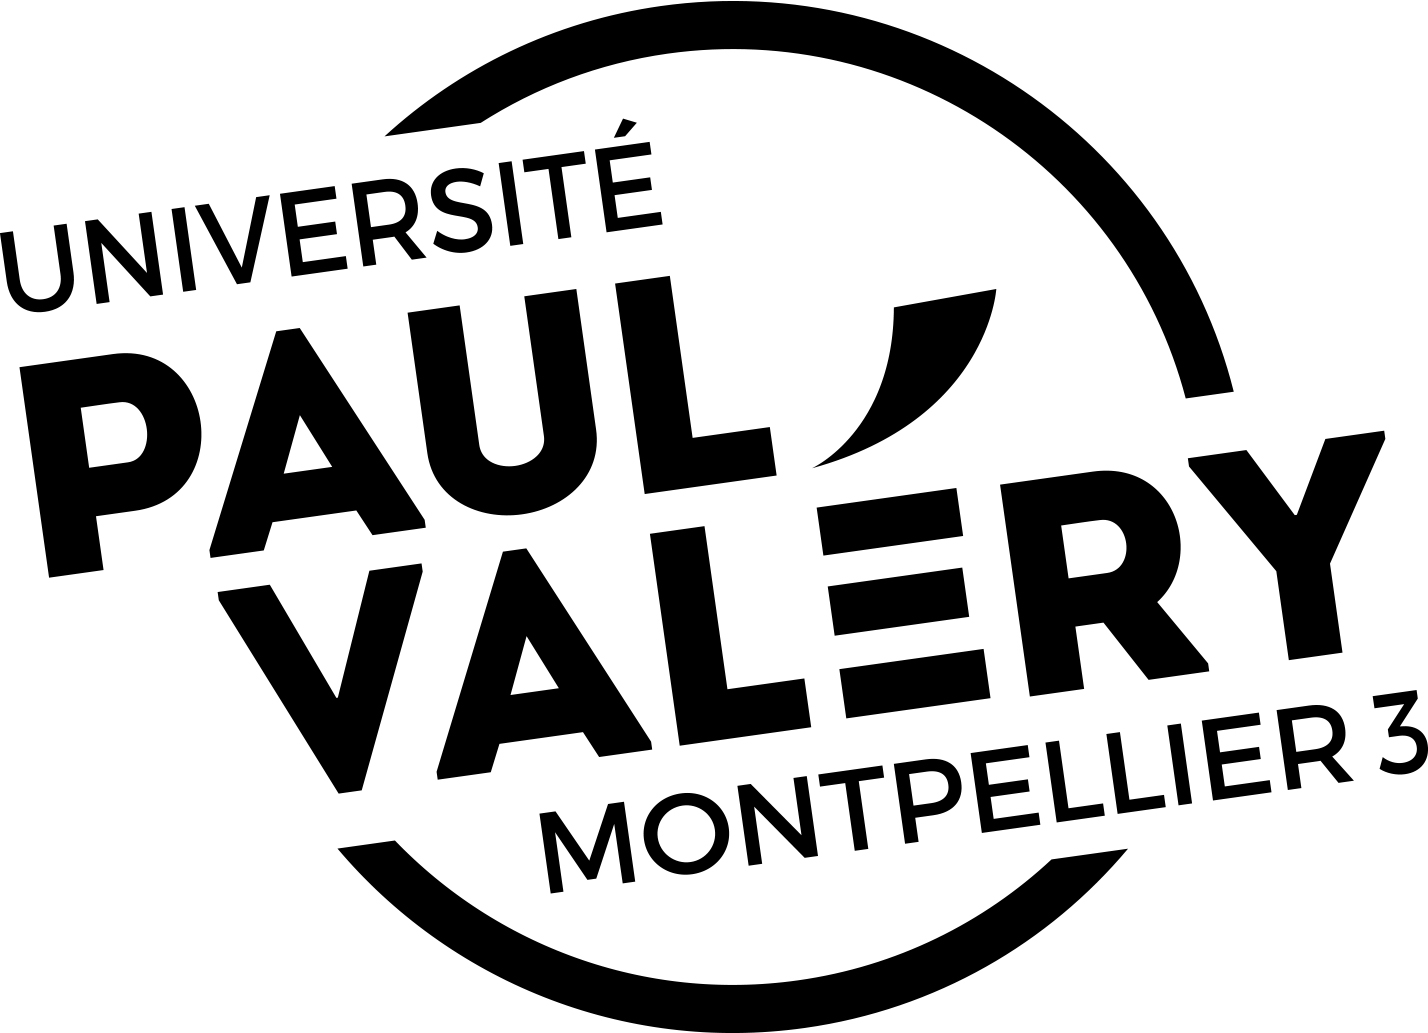 Paul-Valéry Montpellier University and Institute of French as a Foreign Language